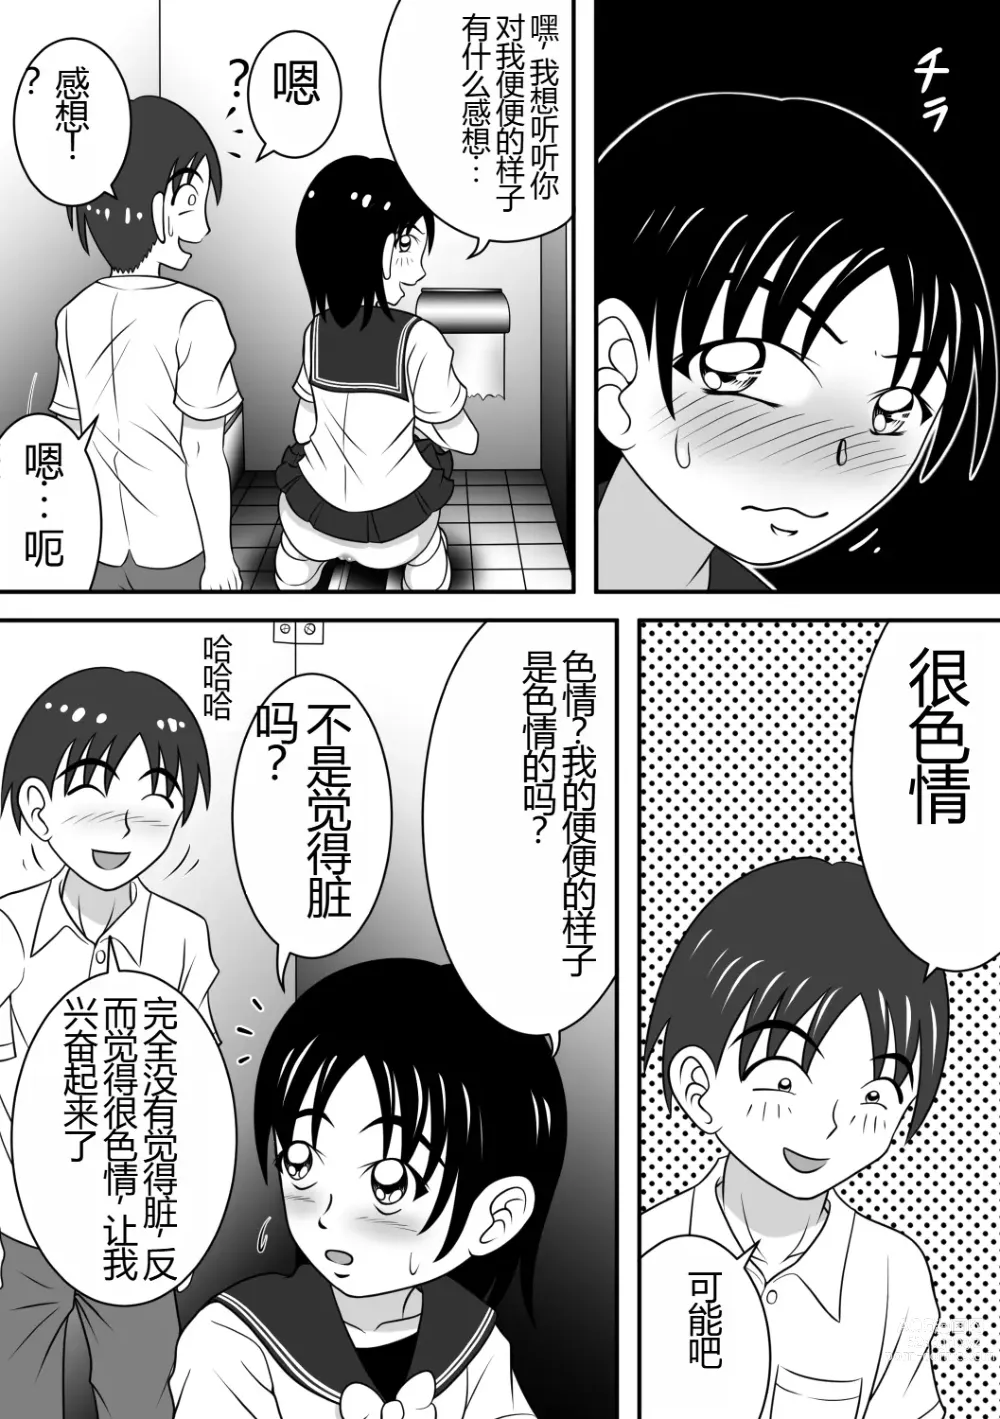 Page 13 of doujinshi 毫无保留的女孩